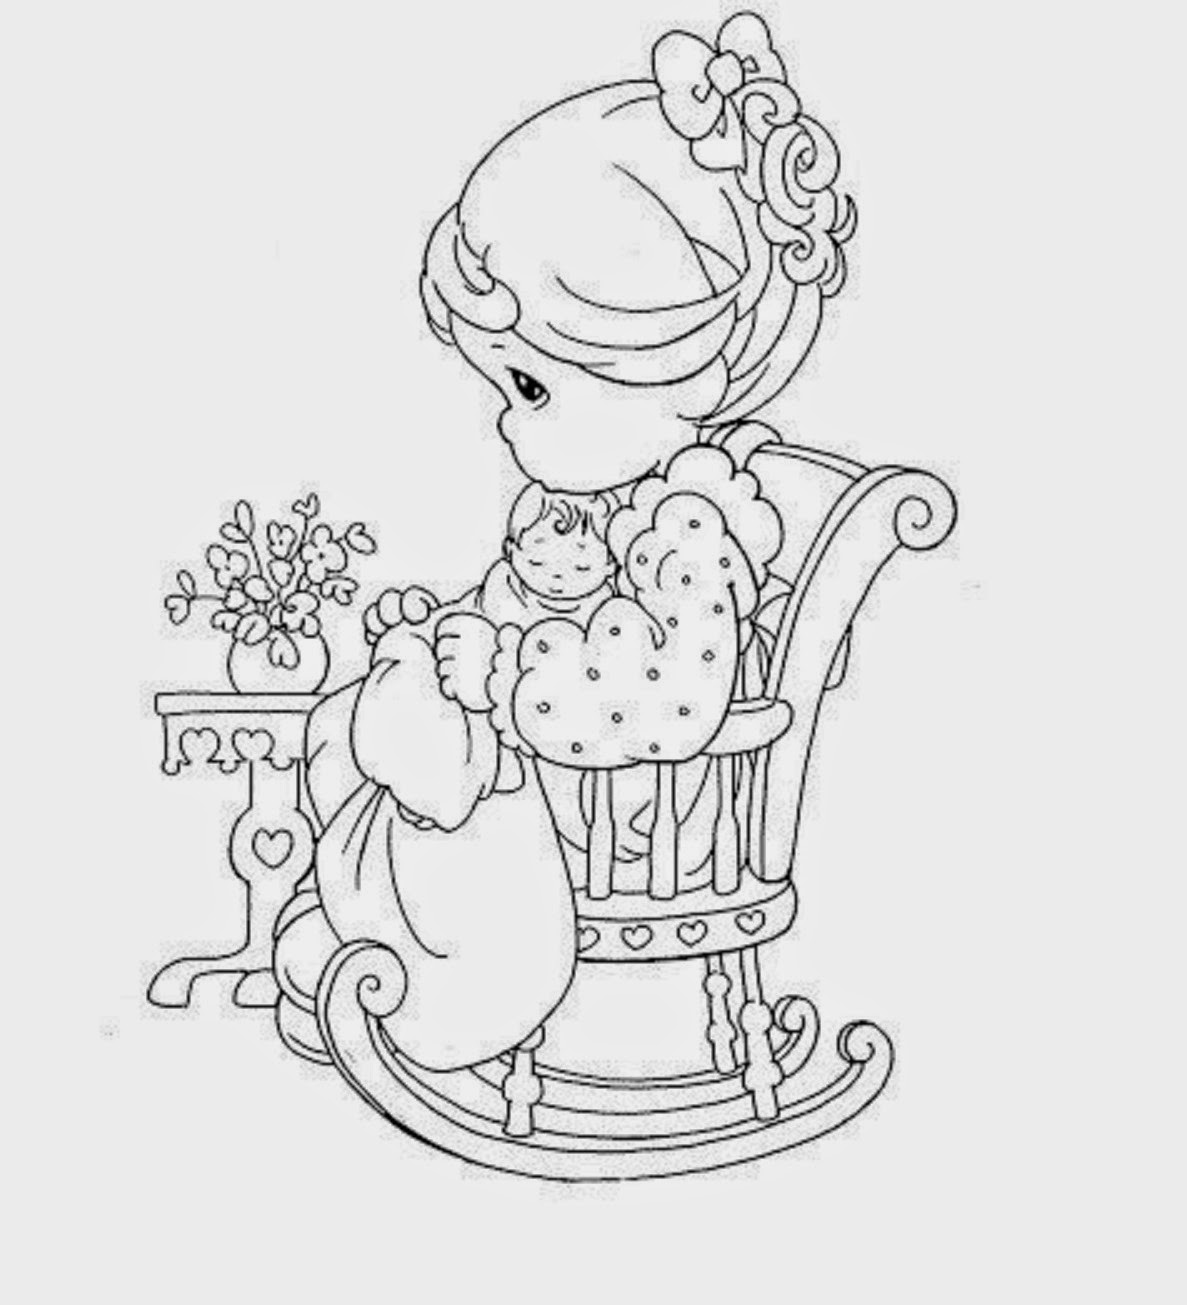 Download colours drawing wallpaper: Beautiful Precious Moments Girl Coloring Page for Kids of a Cute ...